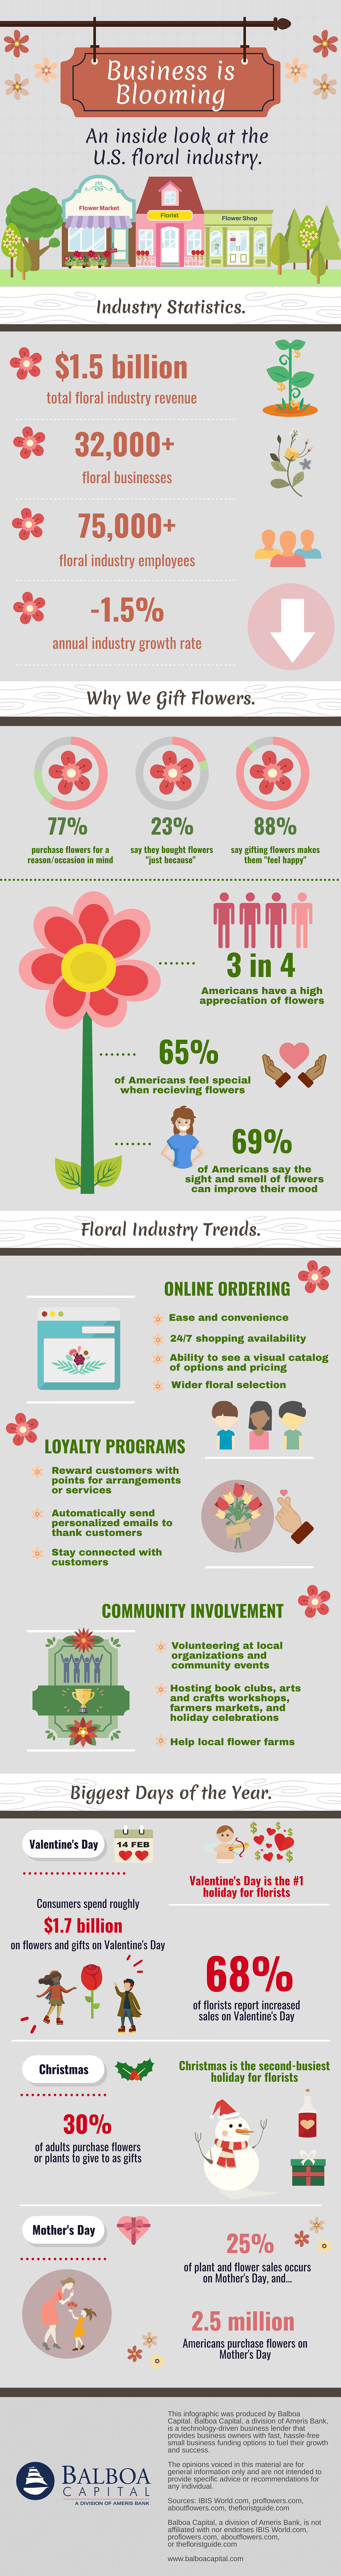 Beauty Salon Industry Infographic